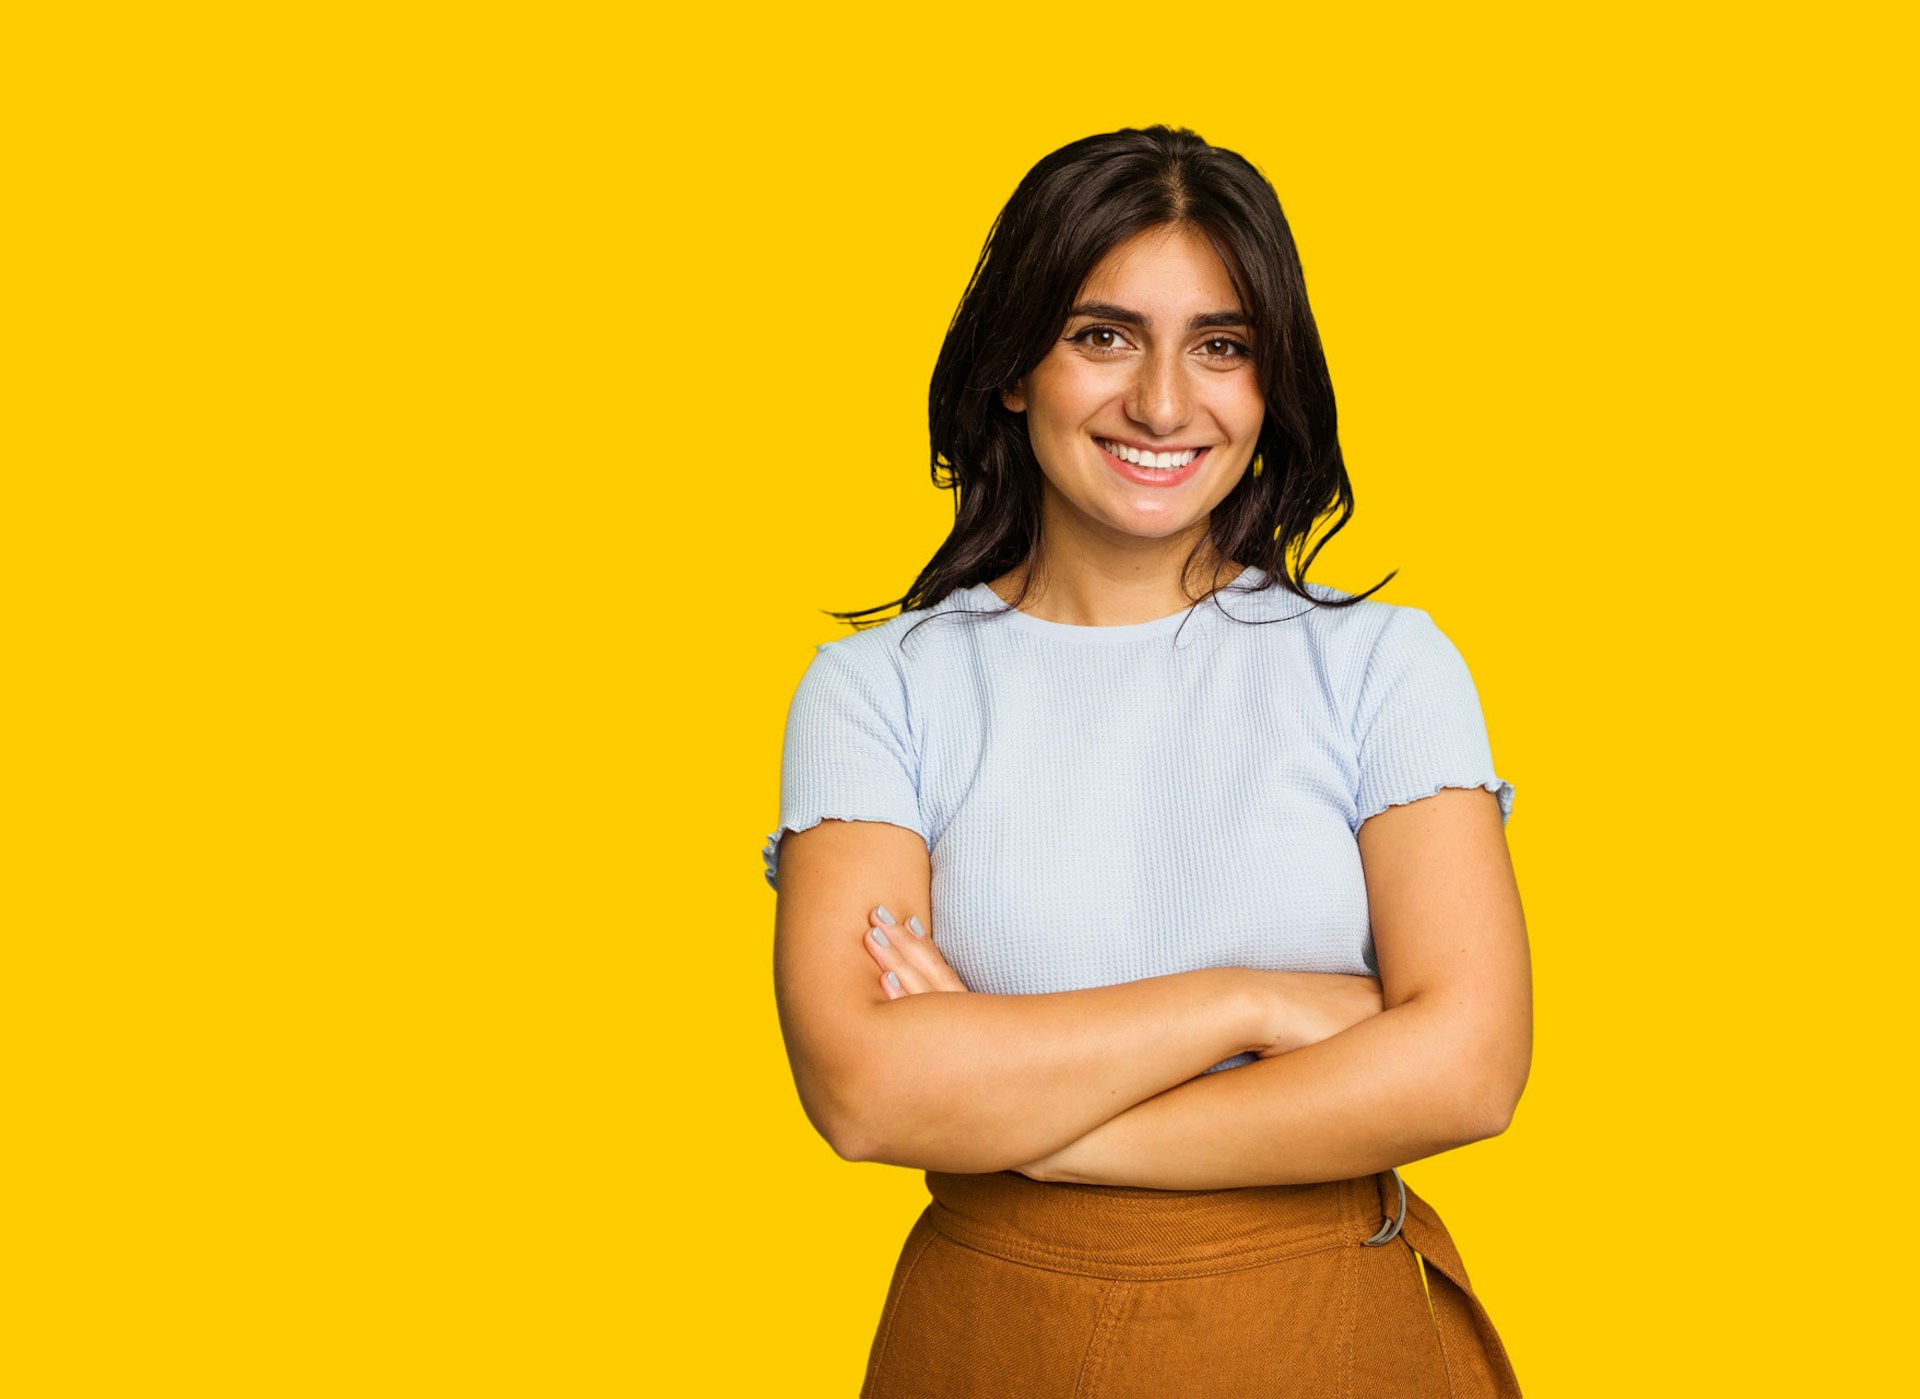 Woman standing in front of a yellow background